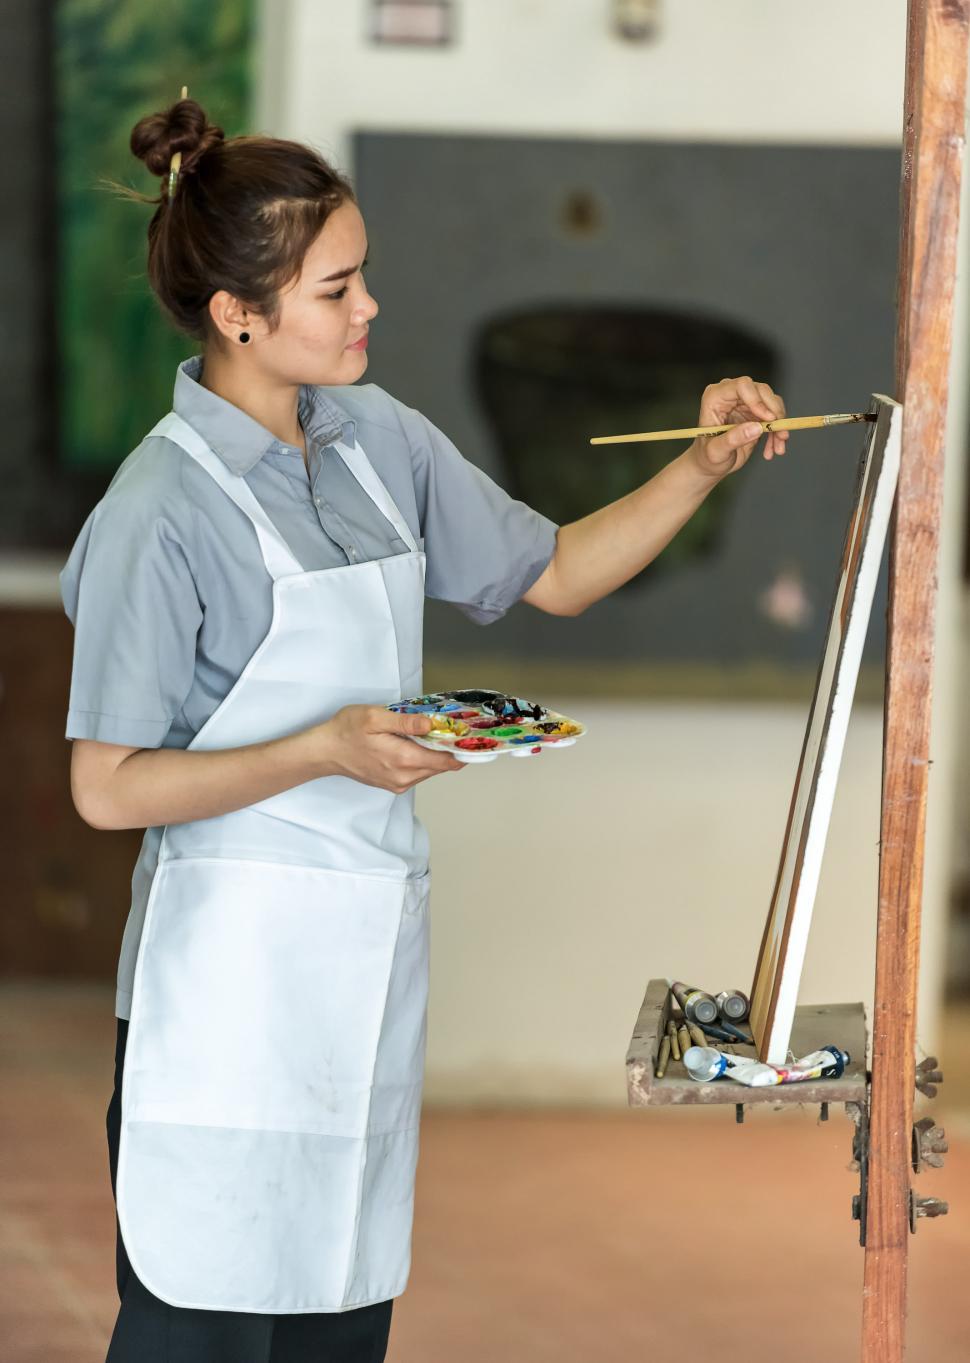 Free Image of Woman in Apron Painting on Easel 